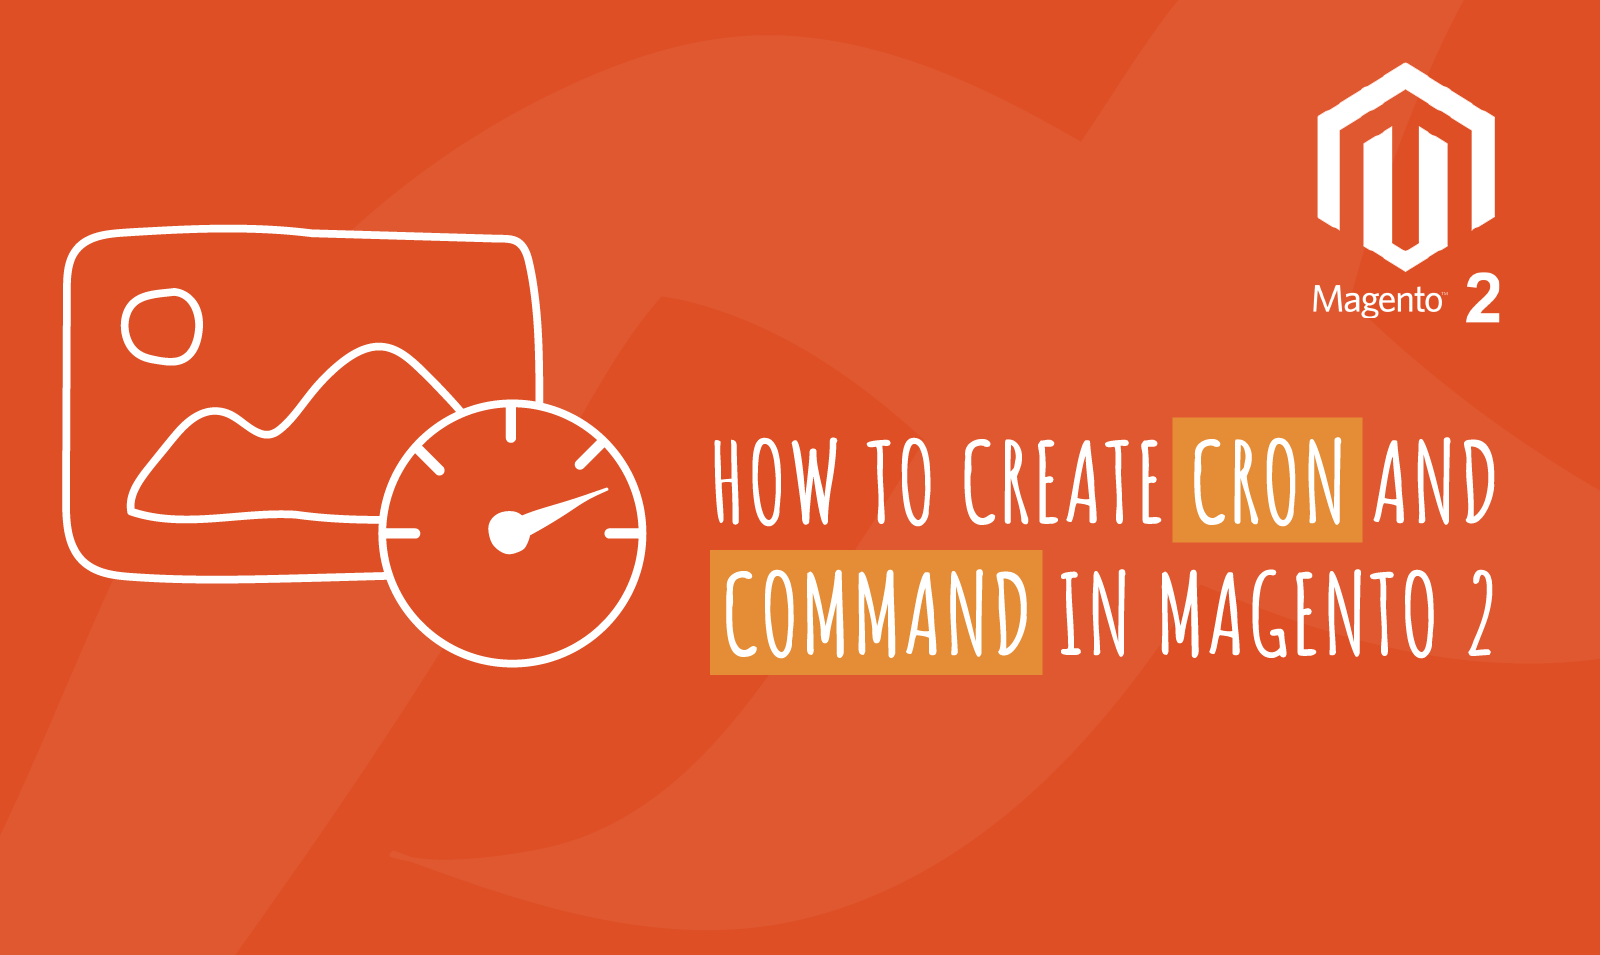 How to create cron and command in Magento 2